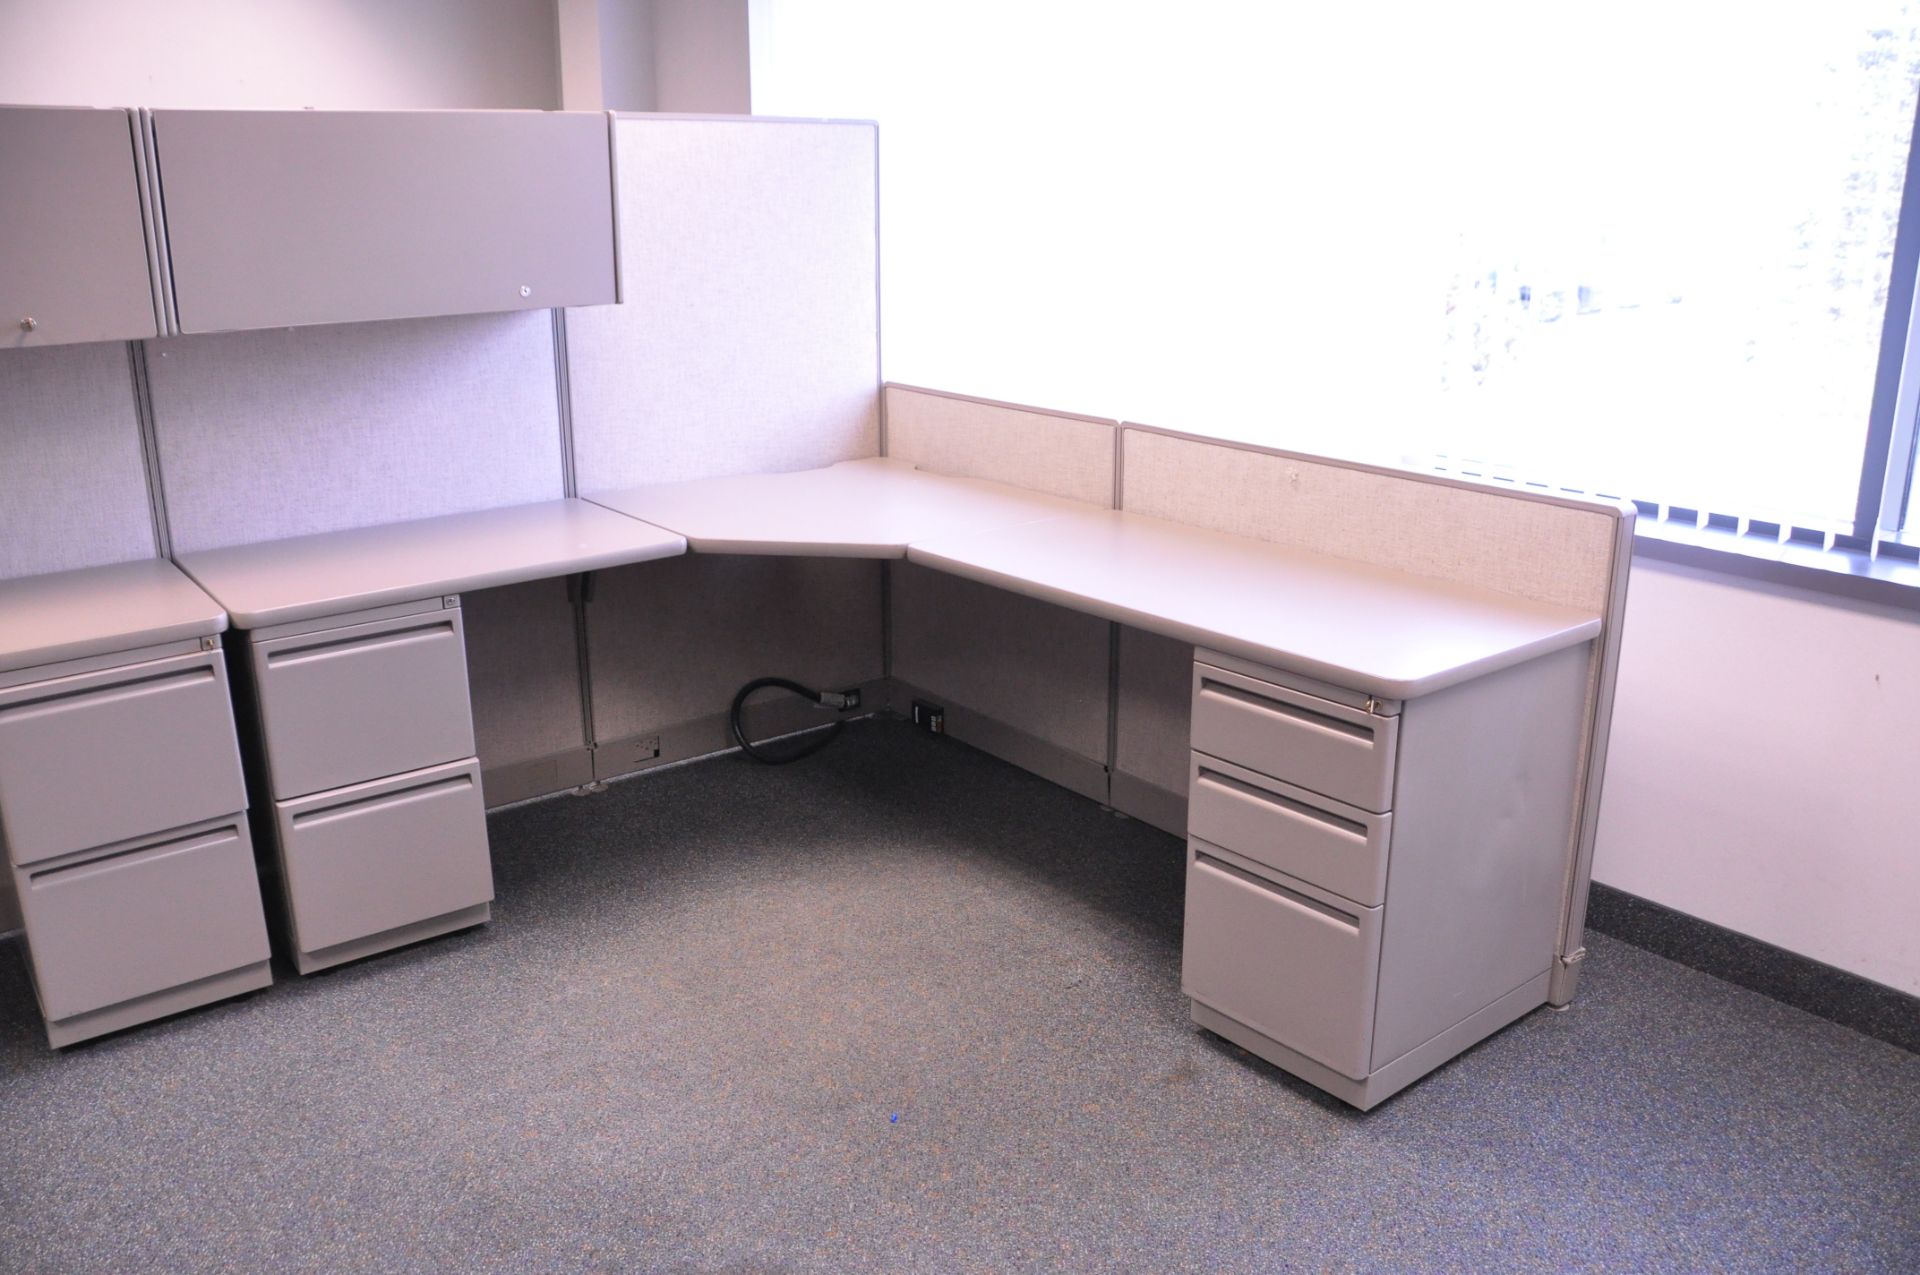 Lot-(1) 3-Station Cubicle Partition Work System with Overhead Cabinets, (No Chairs), (Located 2nd - Image 5 of 5